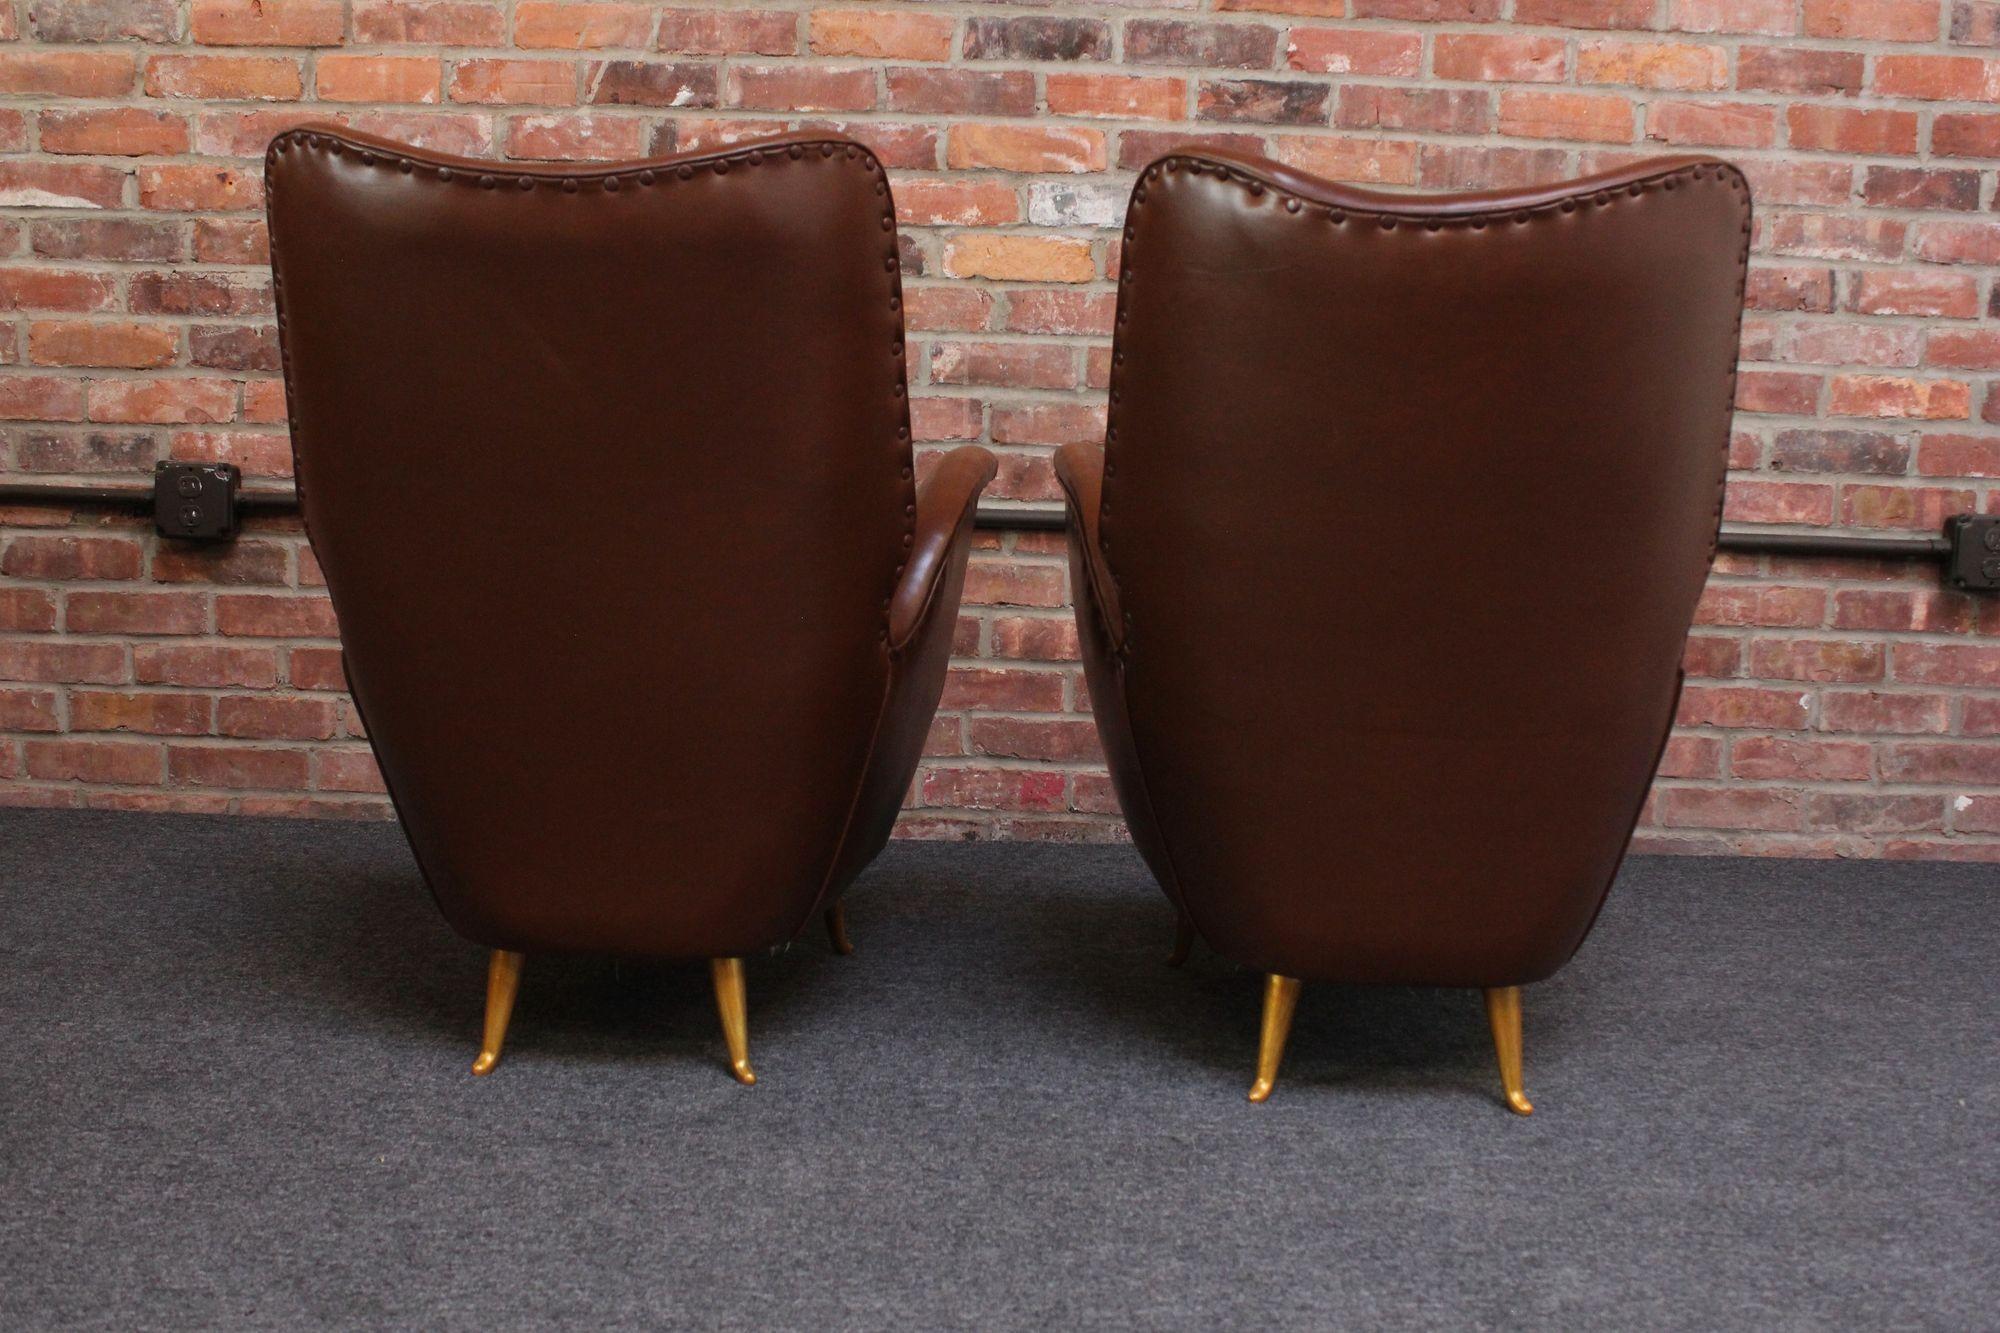 Mid-20th Century Pair of Isa Bergamo Sculptural Petite Club Chairs Attributed to Gio Ponti For Sale